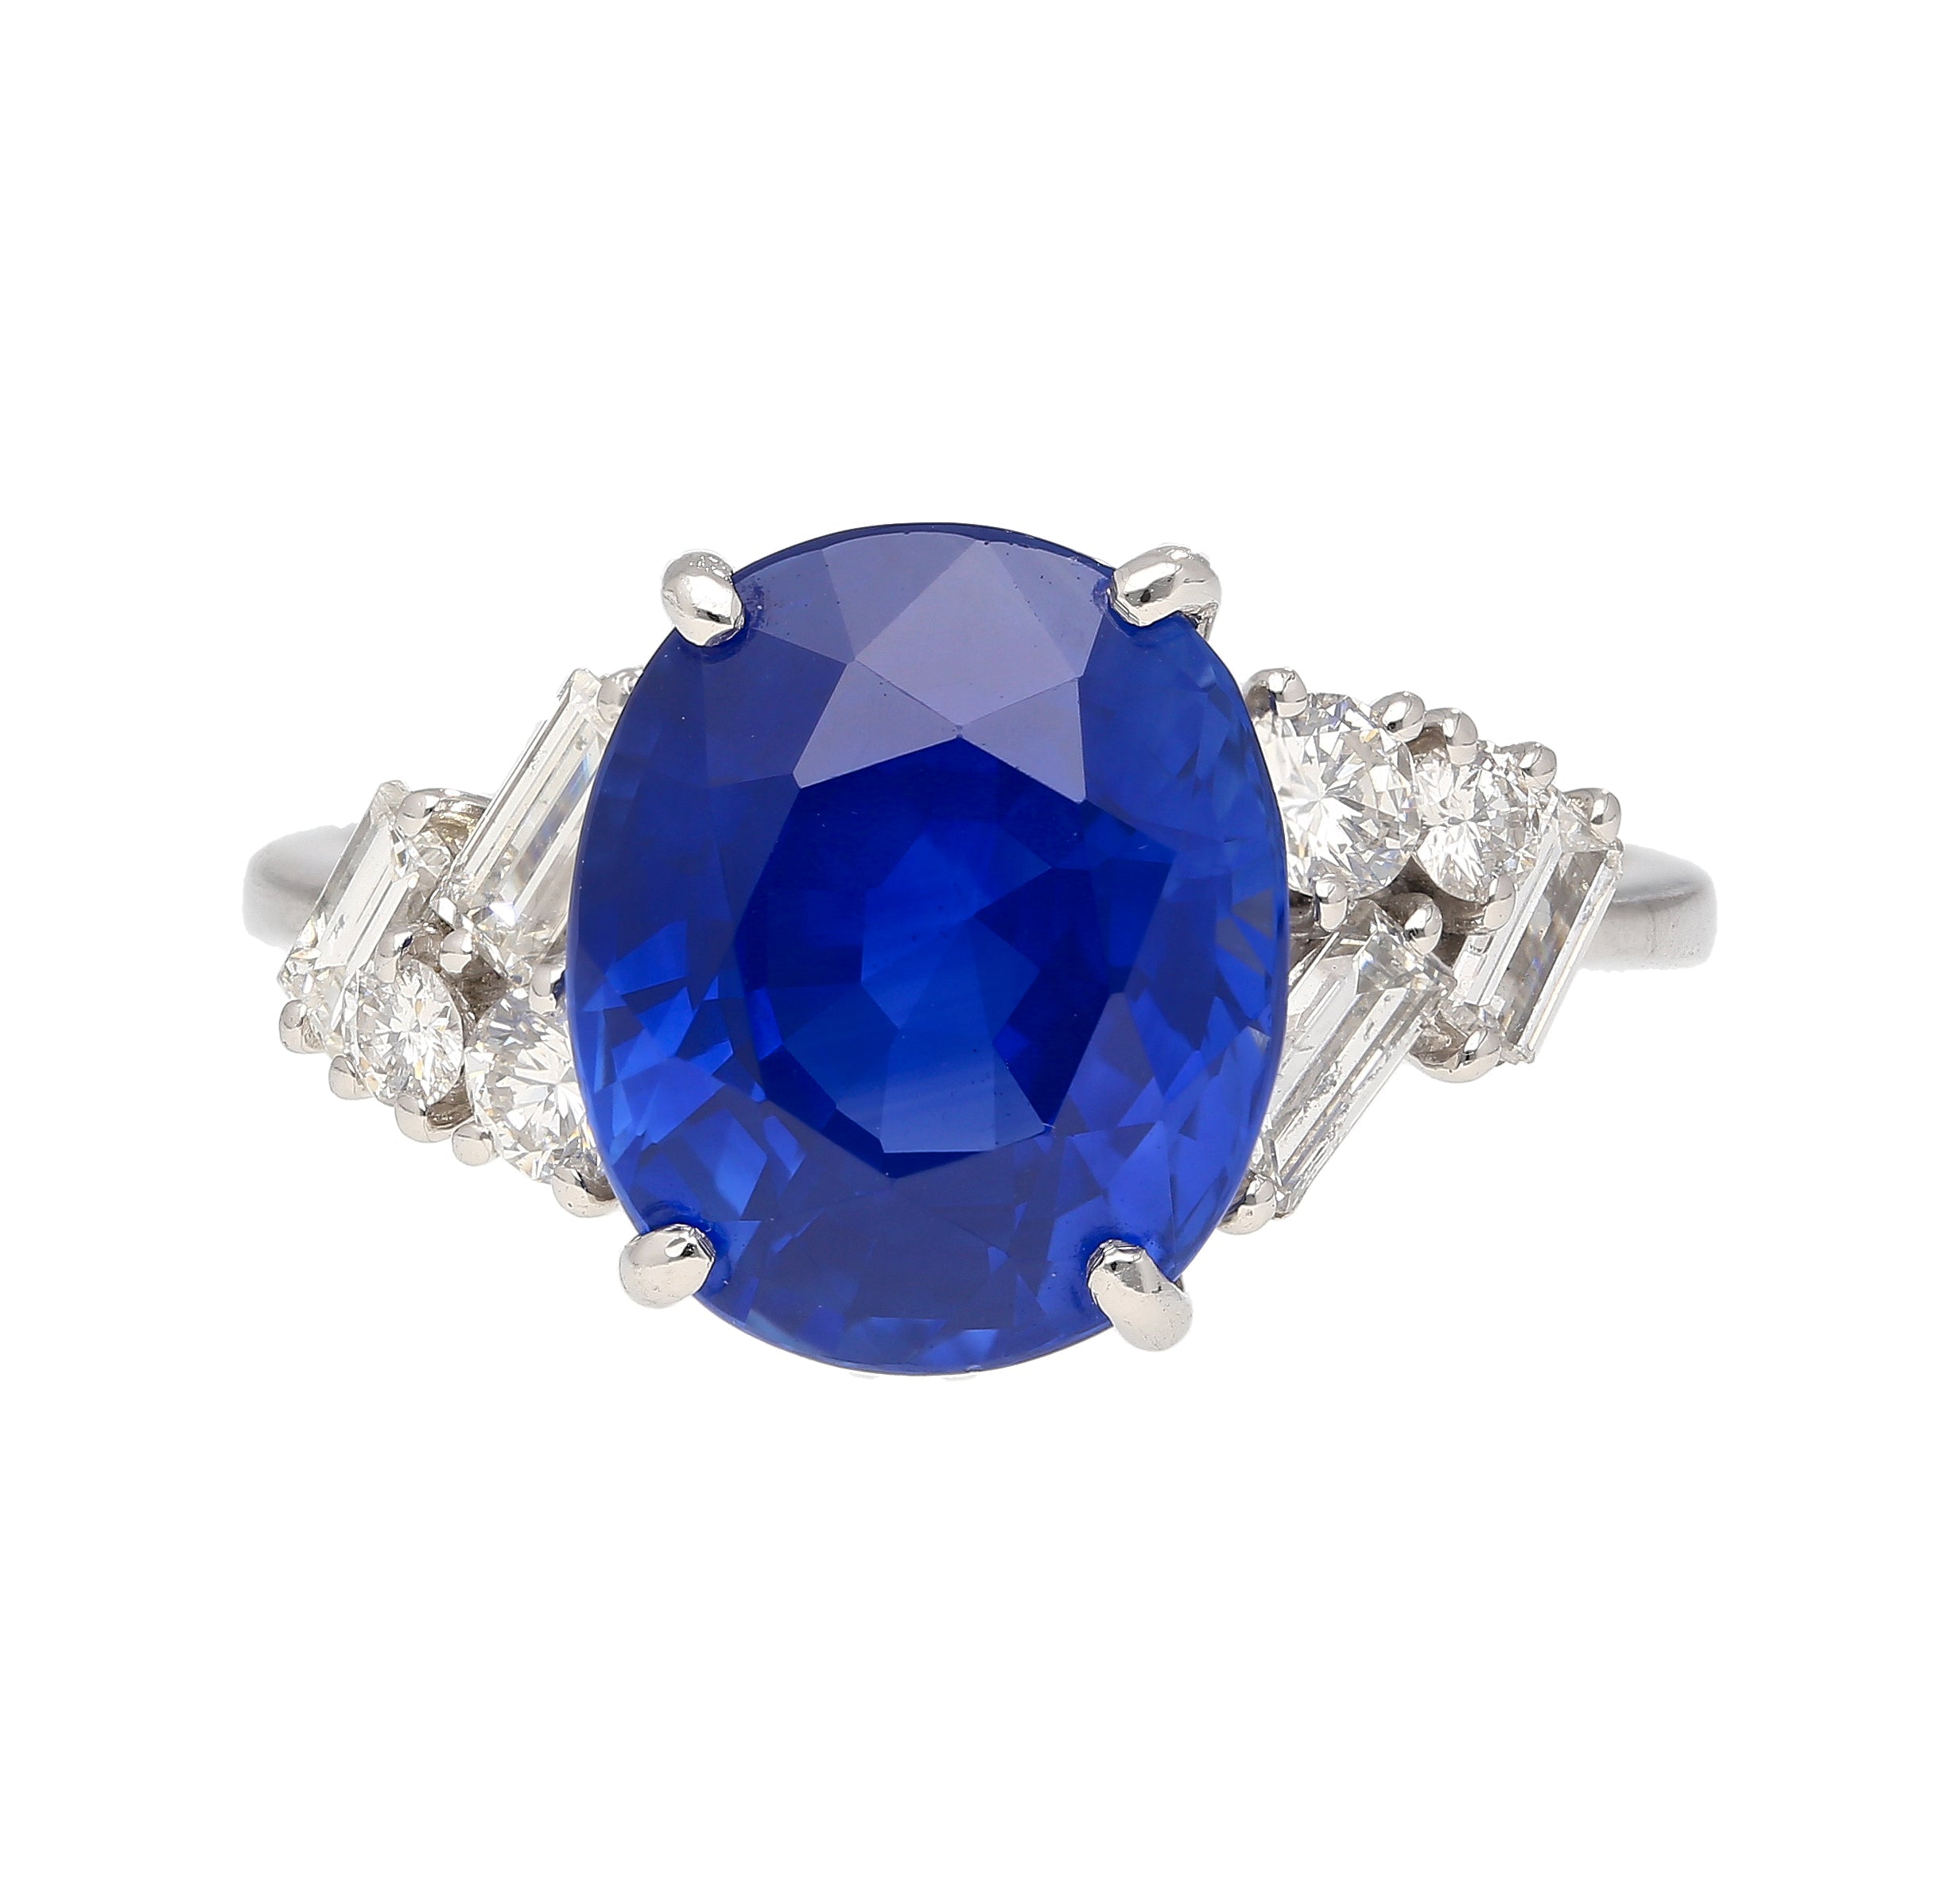 GRS-Certified-6_35-Carat-Oval-Cut-Royal-Blue-Sapphire-with-Diamonds-in-Platinum-Ring-Rings.jpg